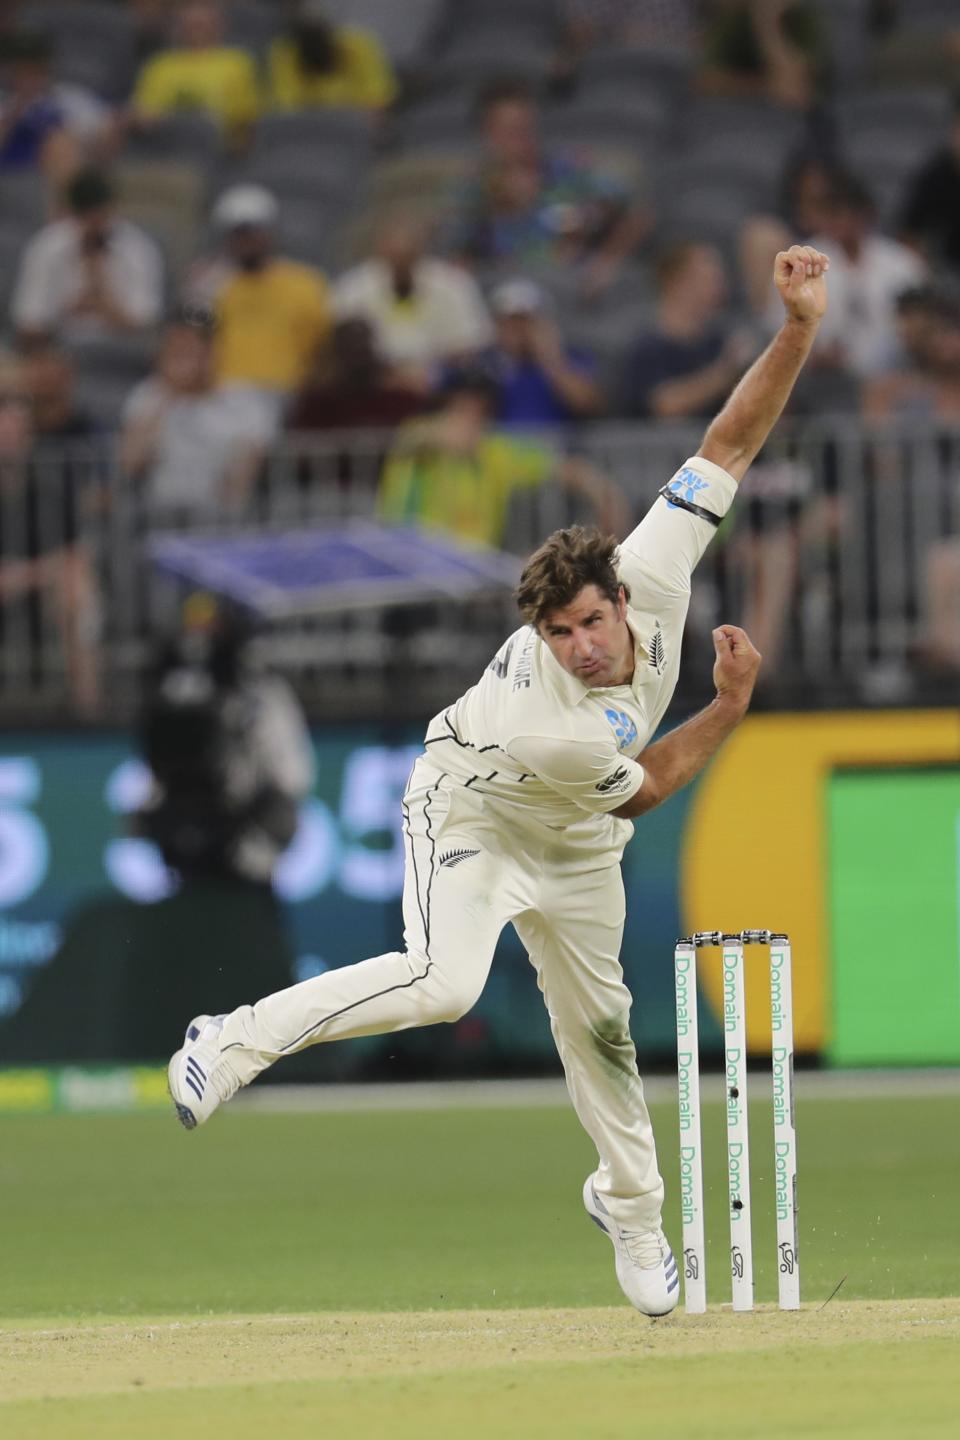 New Zealand's Colin de Grandhomme bowls during play in their cricket test against Australia in Perth, Australia, Thursday, Dec. 12, 2019. (AP Photo/Trevor Collens)